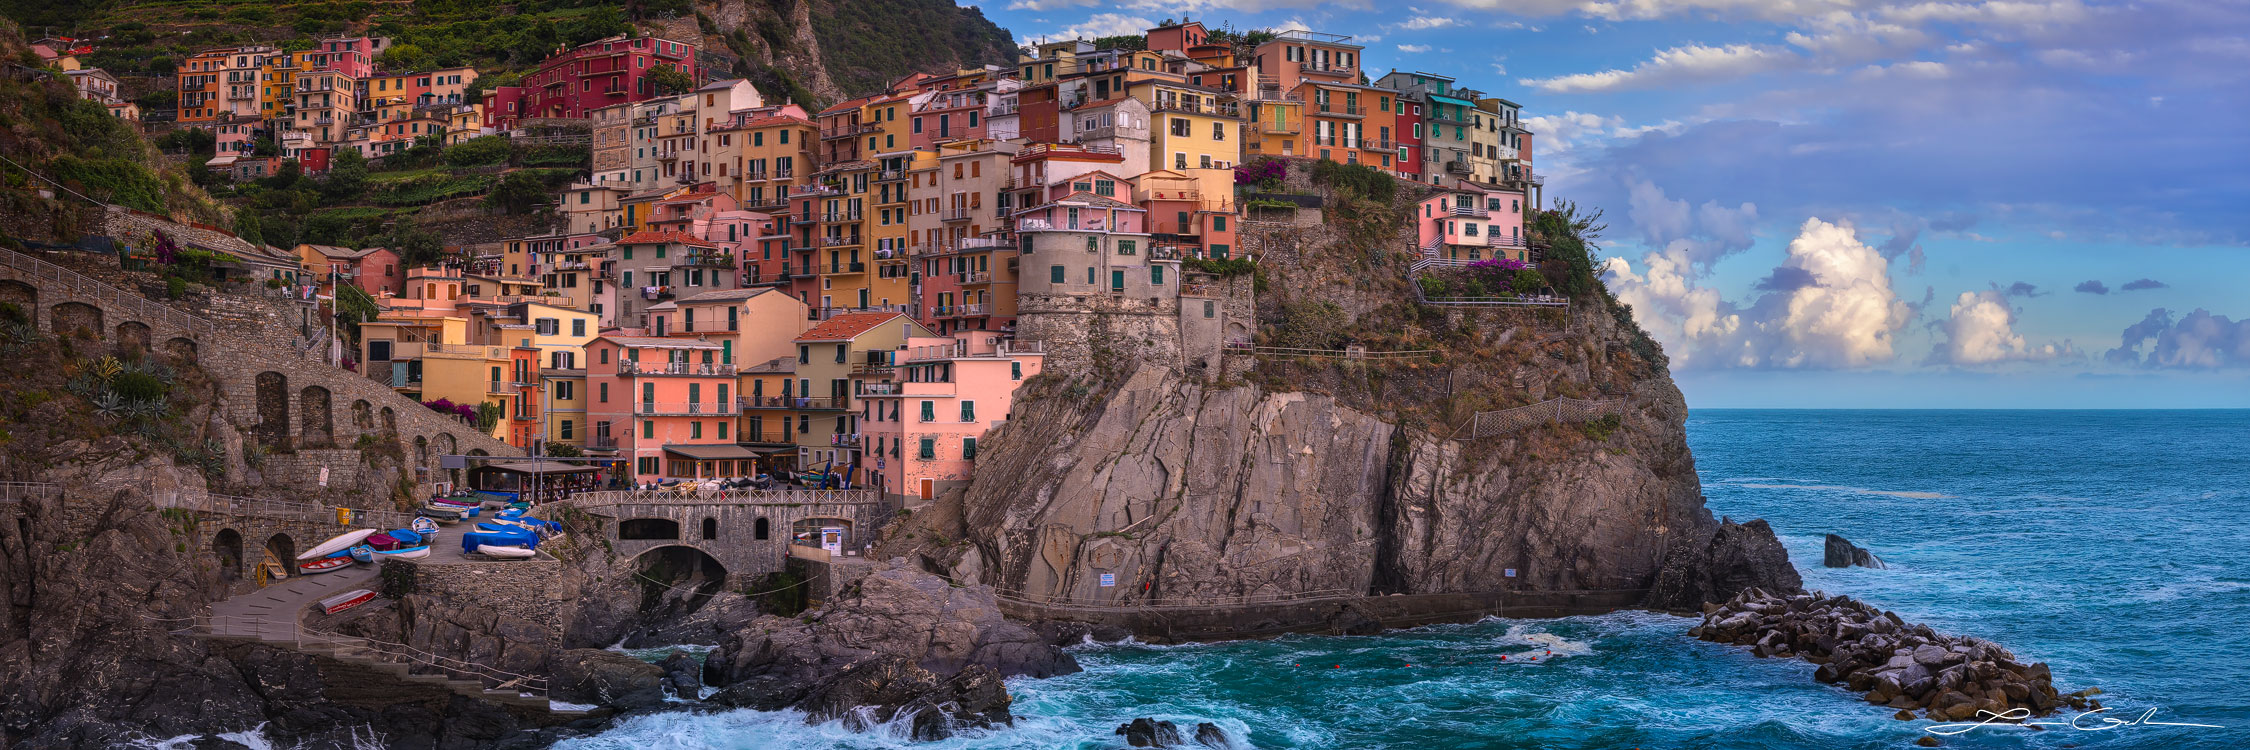 Colorful charming houses perched on a sea cliff overlooking the sea, Cinque Terre, Italy